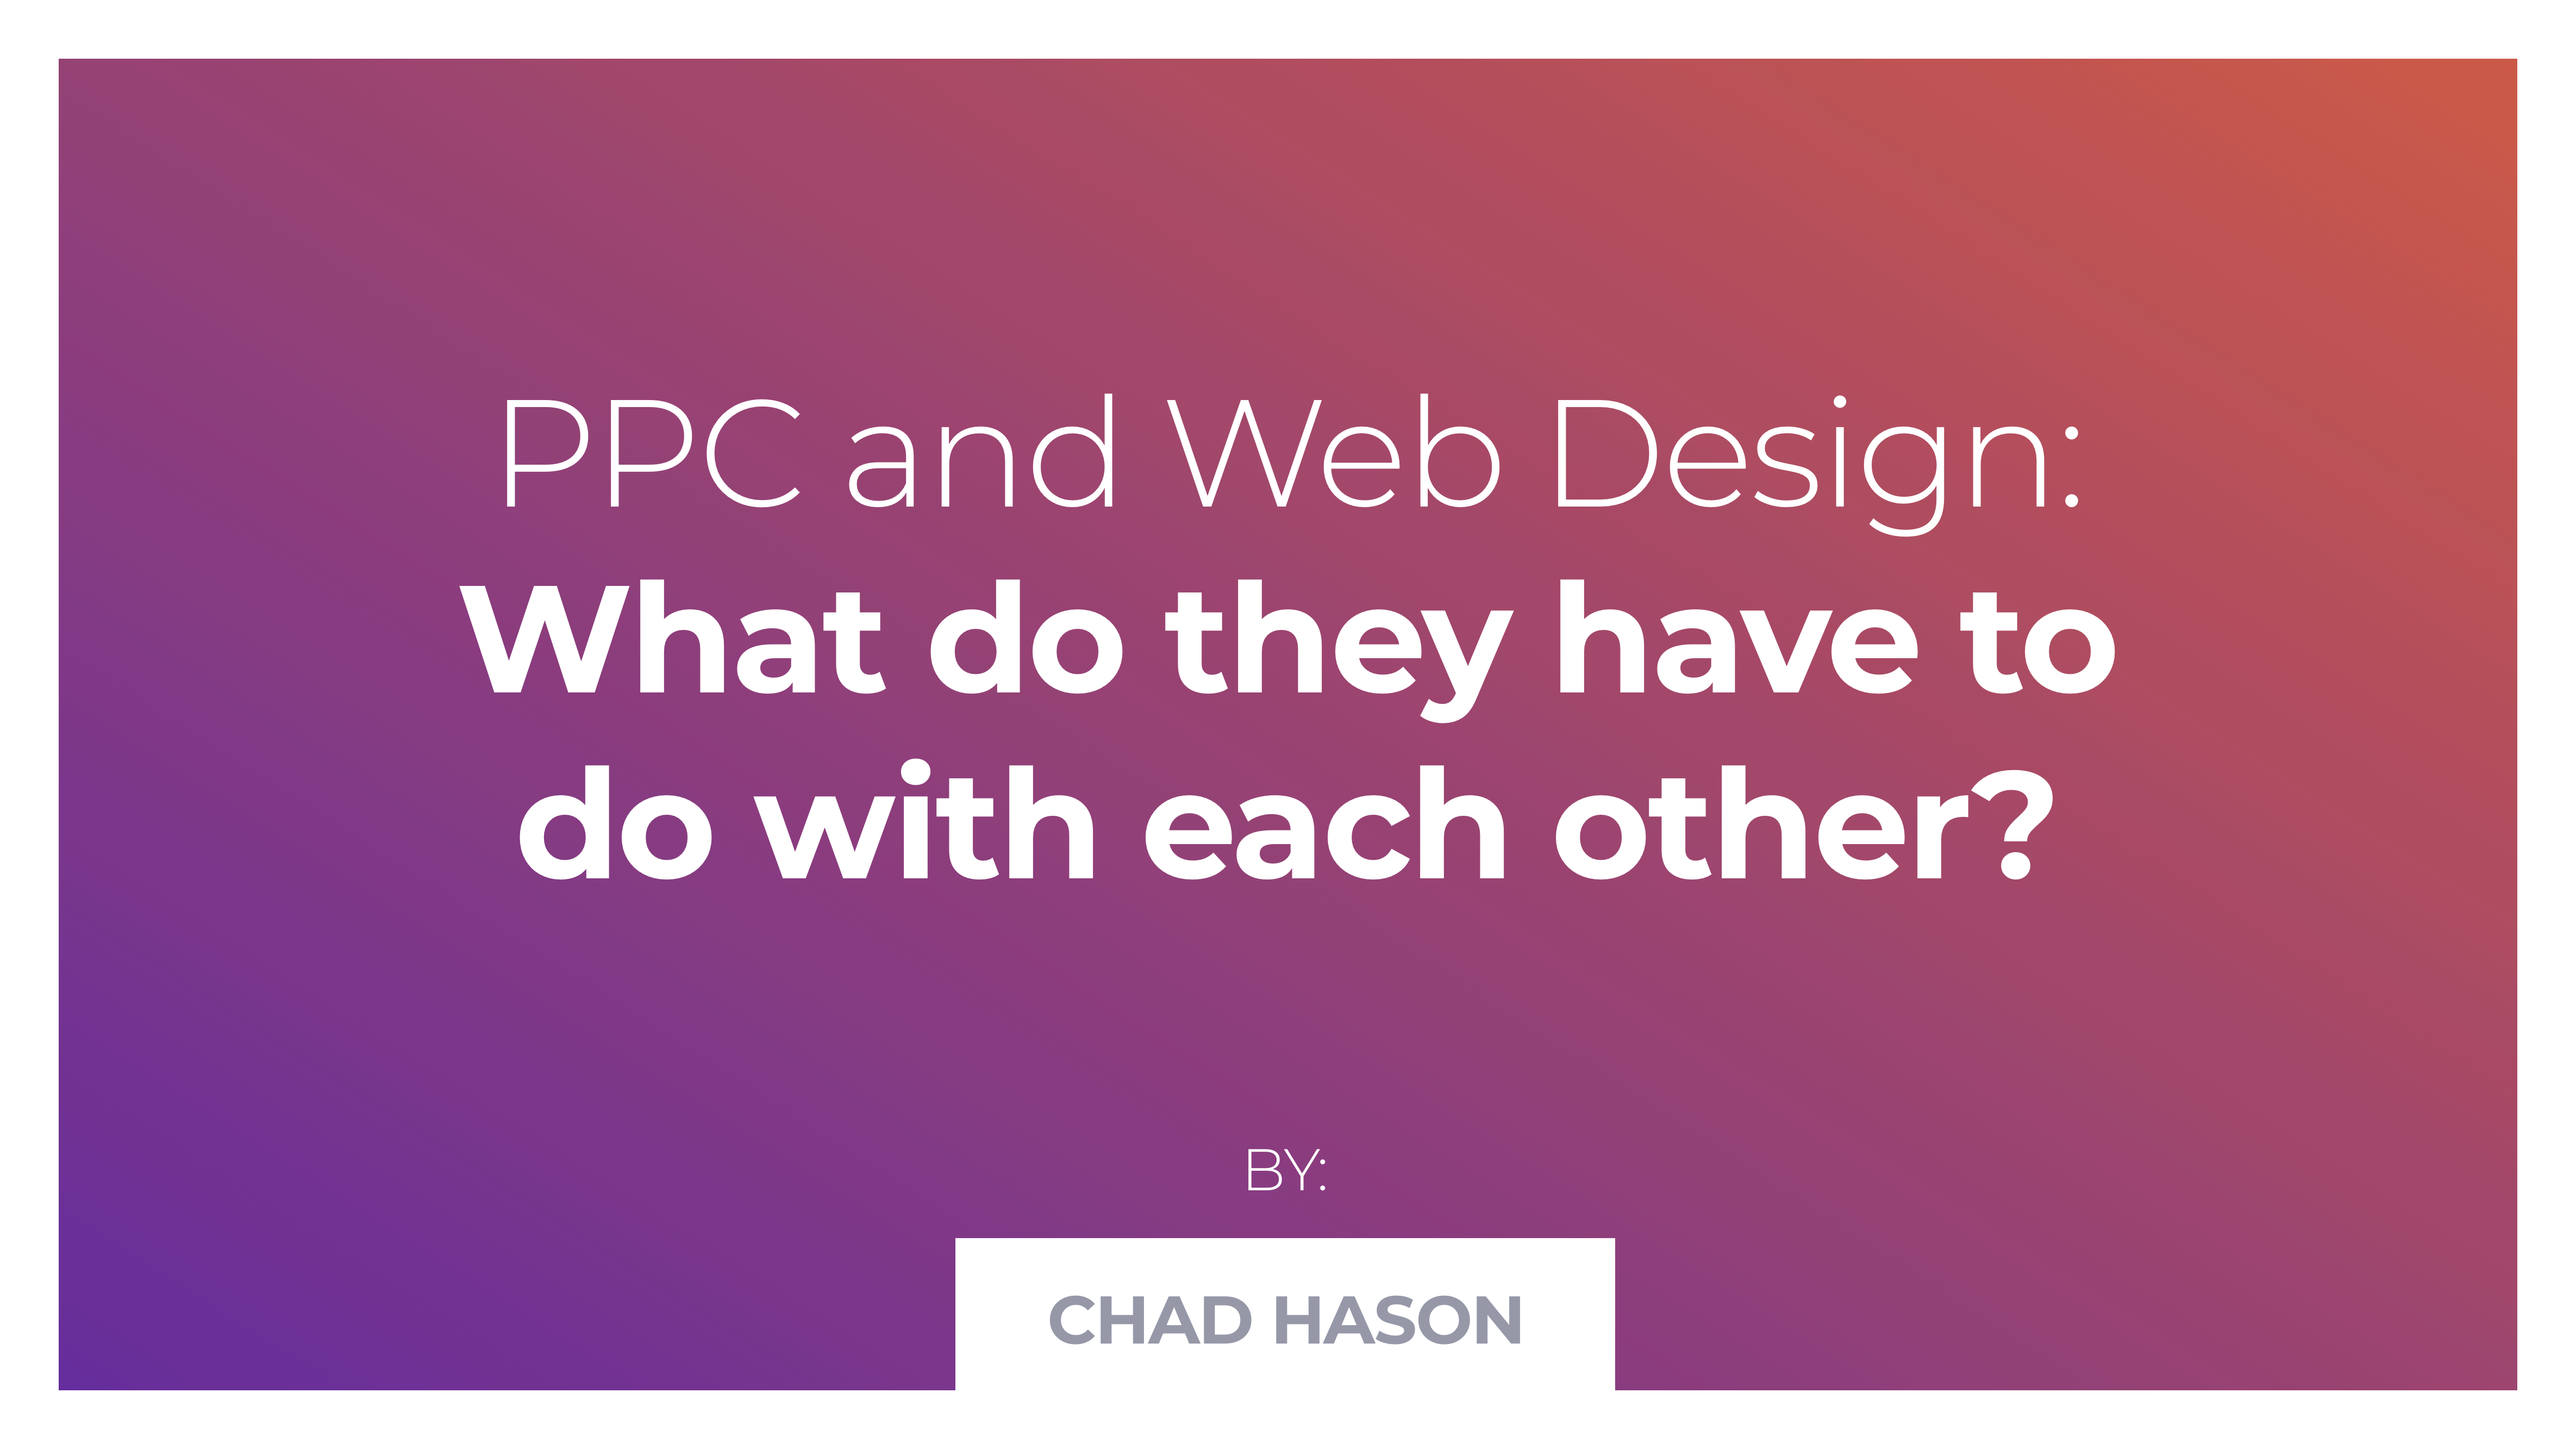 PPC and Web Design: What do they have to do with each other?